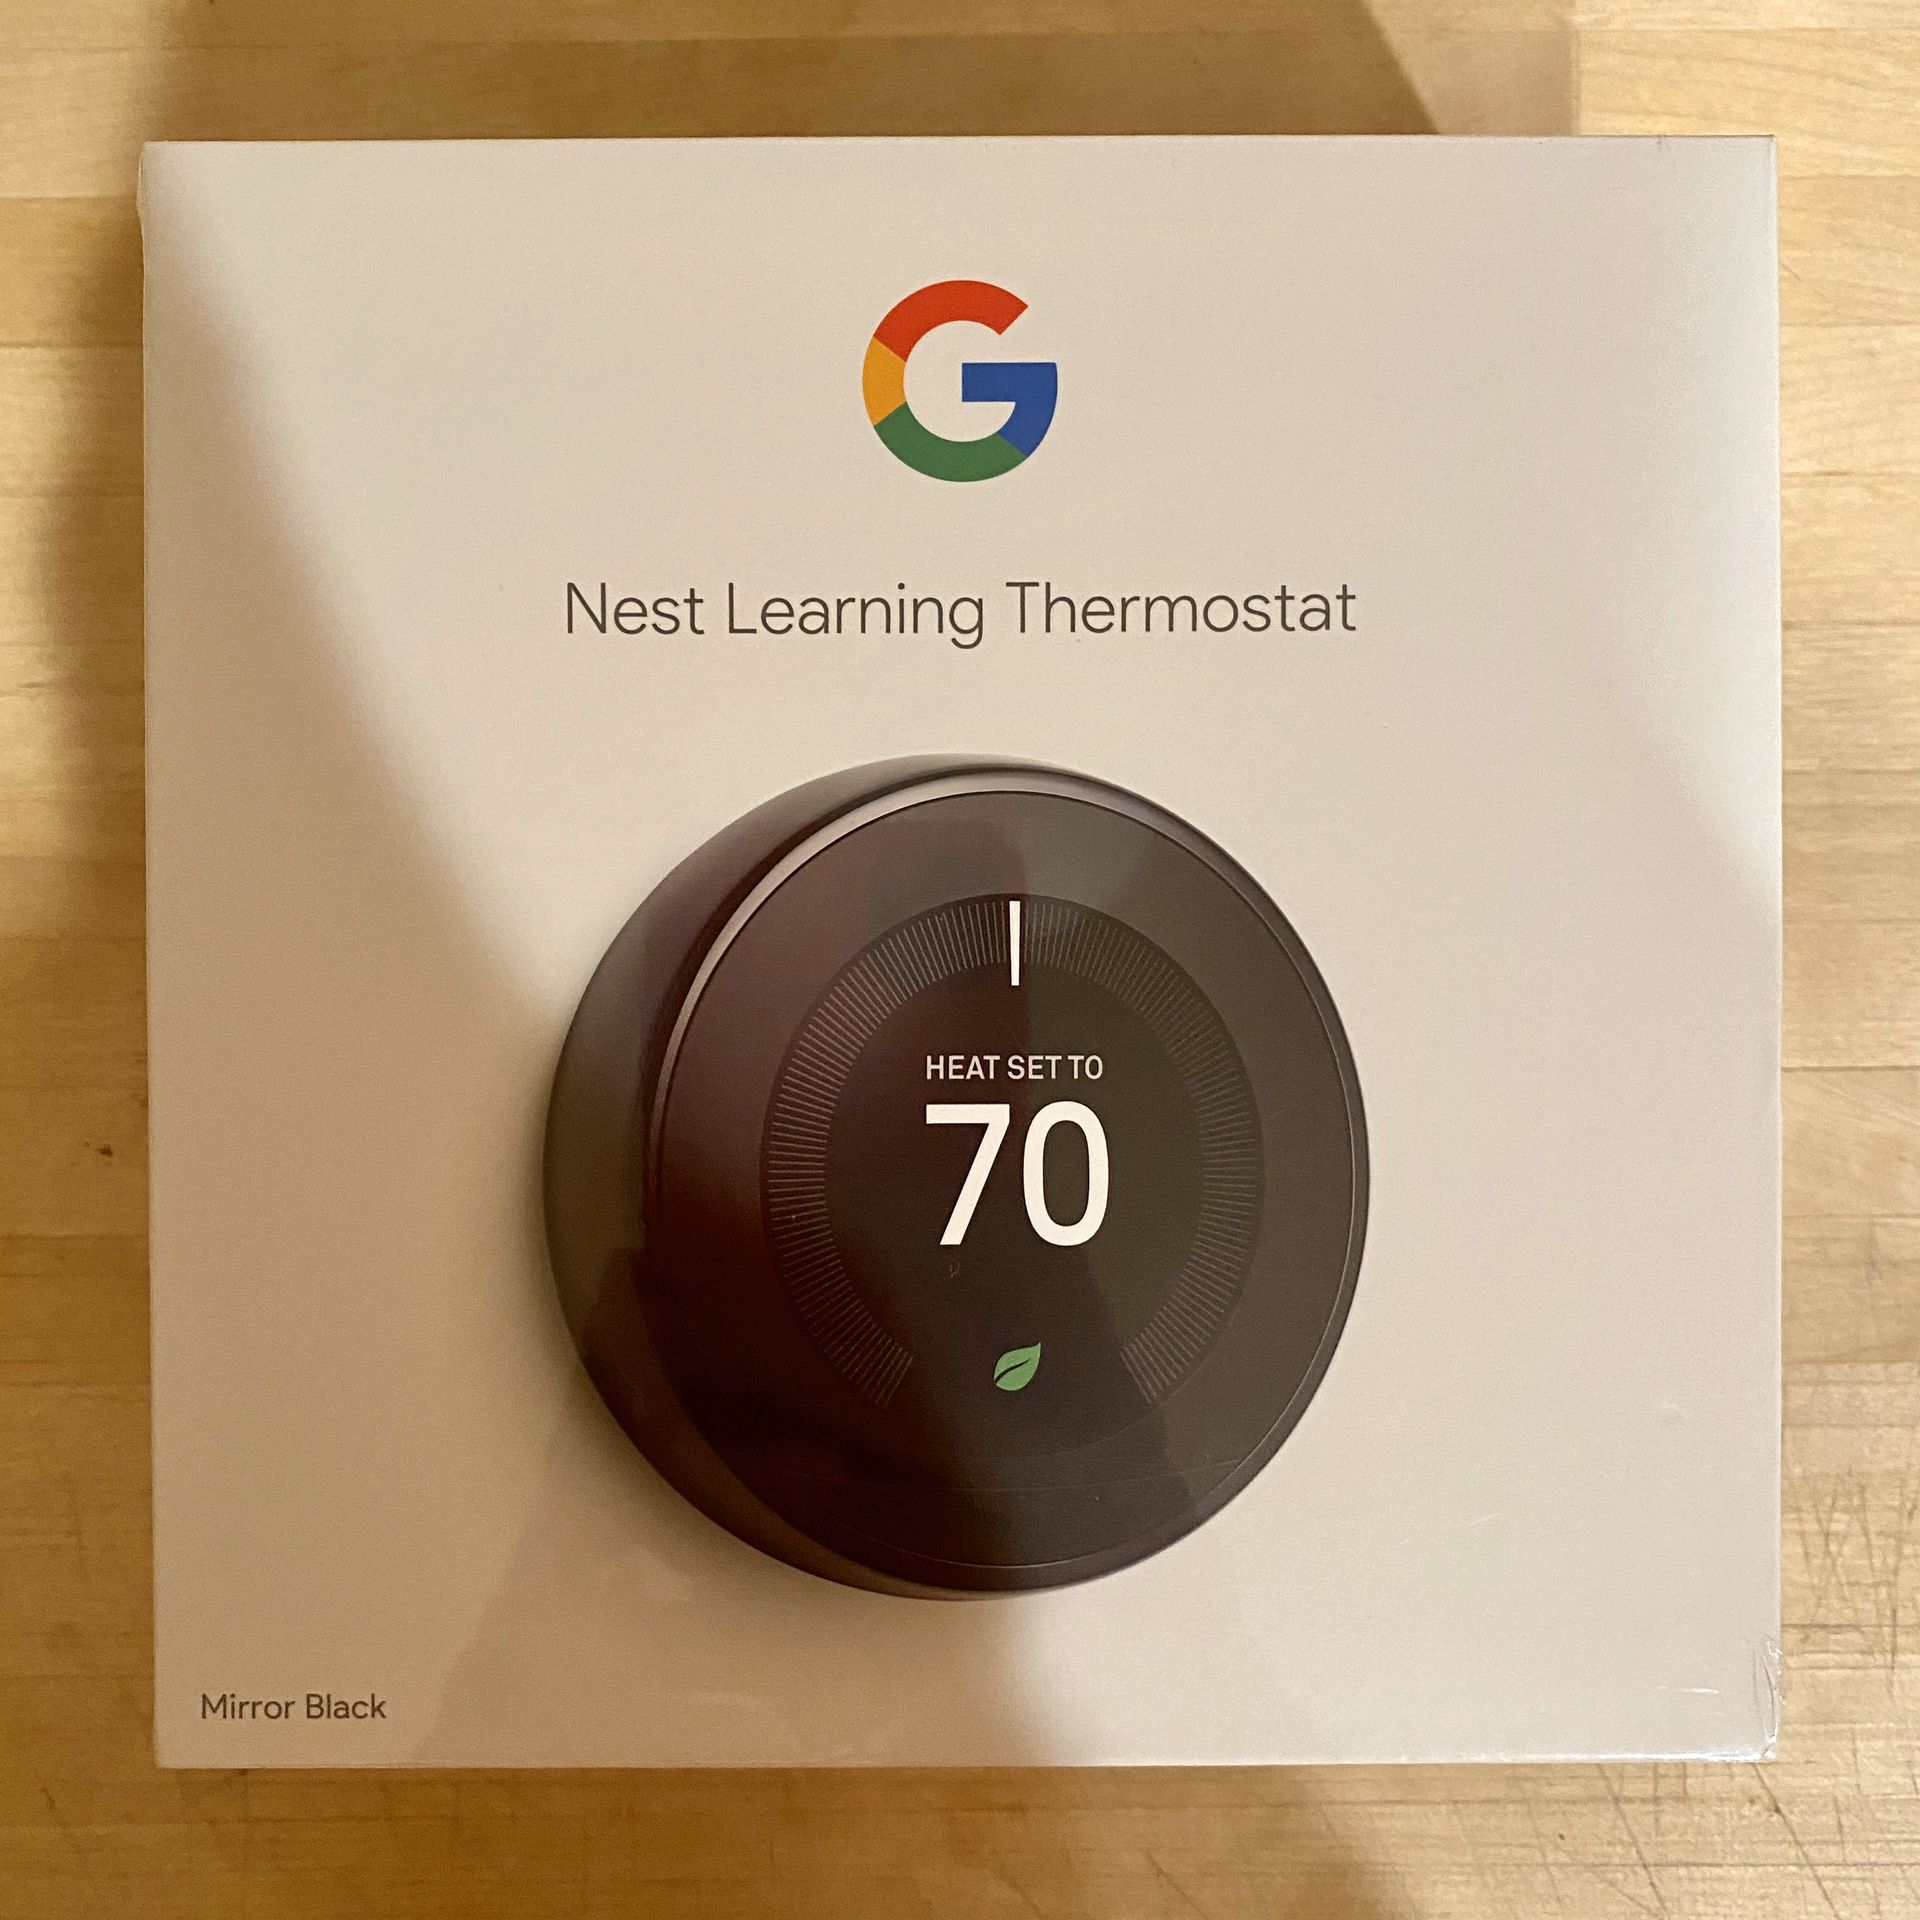 BRAND NEW Nest Learning Thermostat (Mirror Black) 3rd Generation